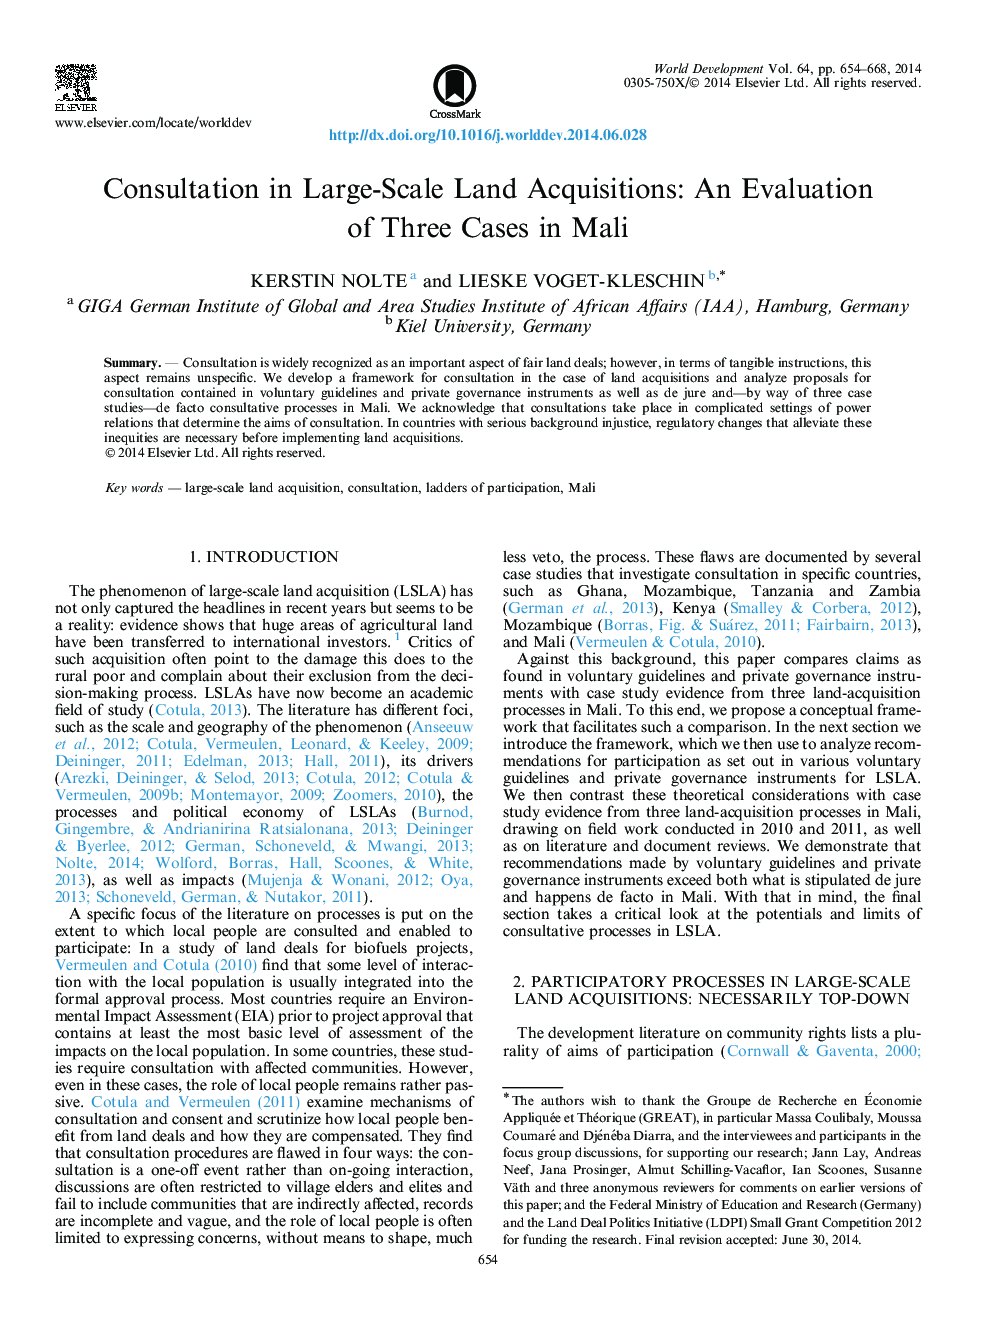 Consultation in Large-Scale Land Acquisitions: An Evaluation of Three Cases in Mali